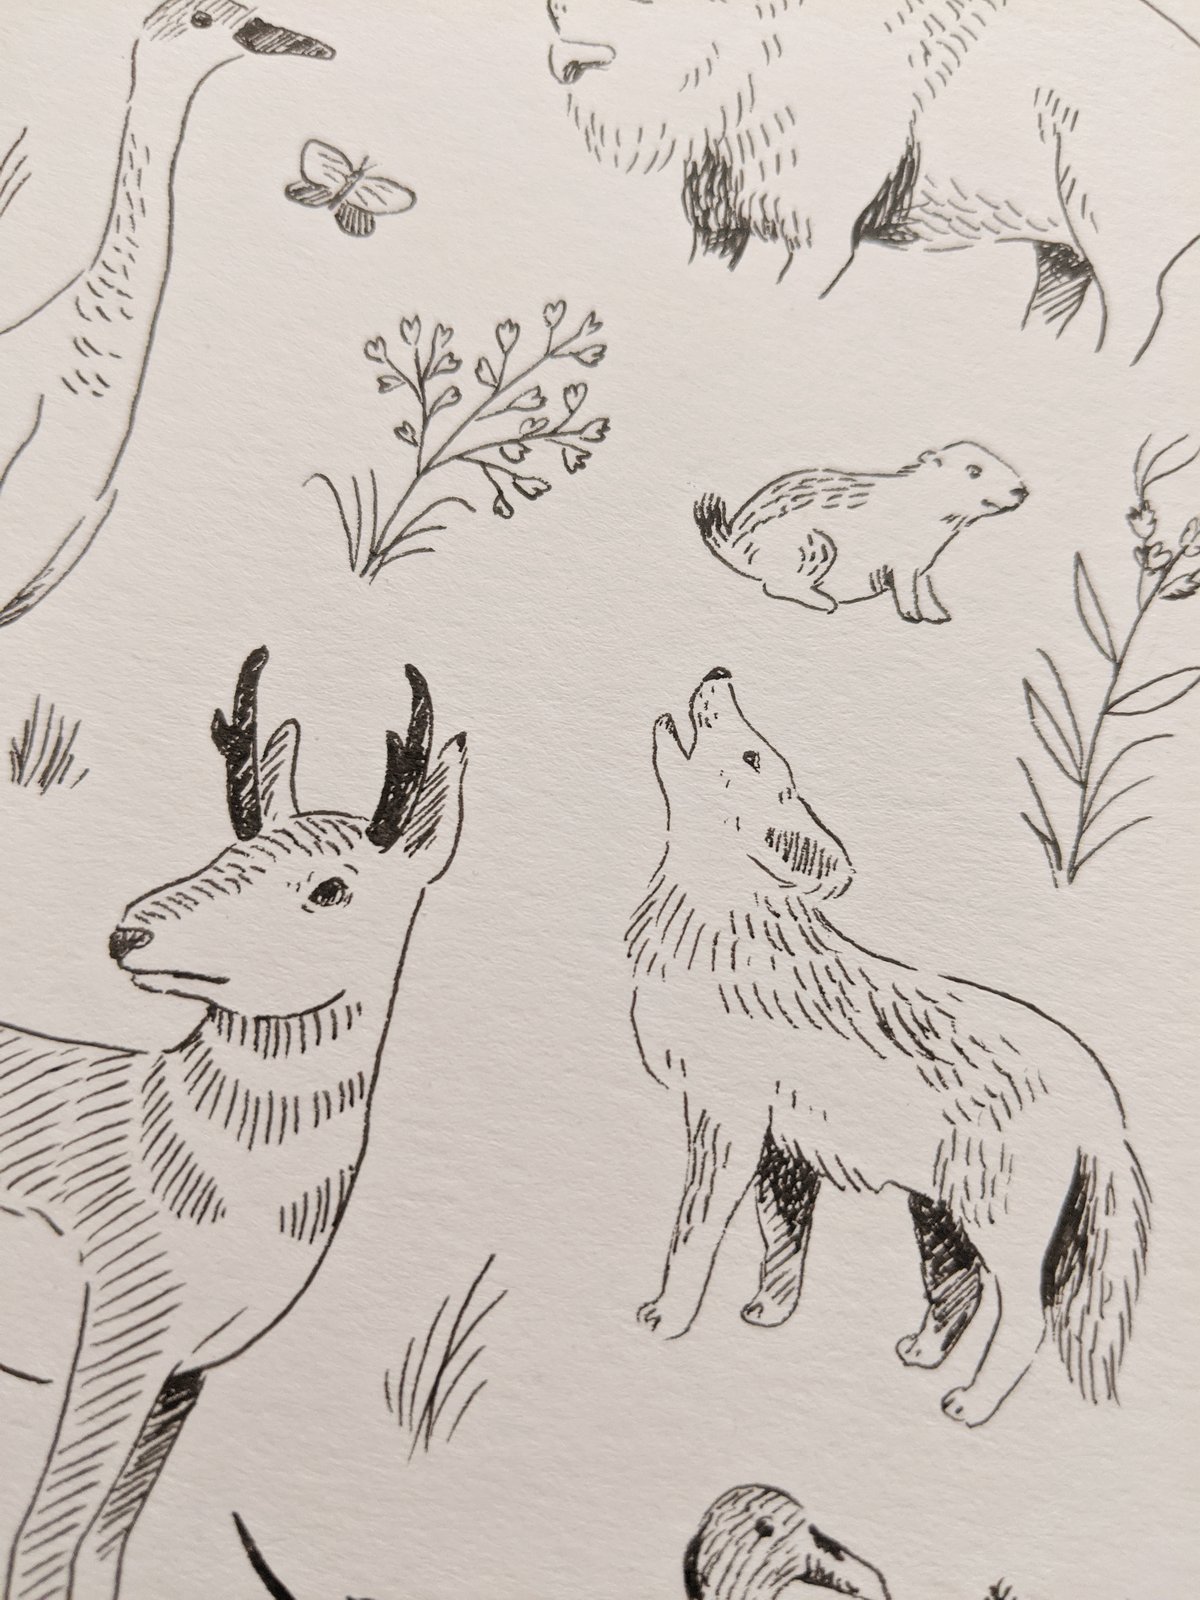 Tips To Help You Learn to Draw Animals | Craftsy